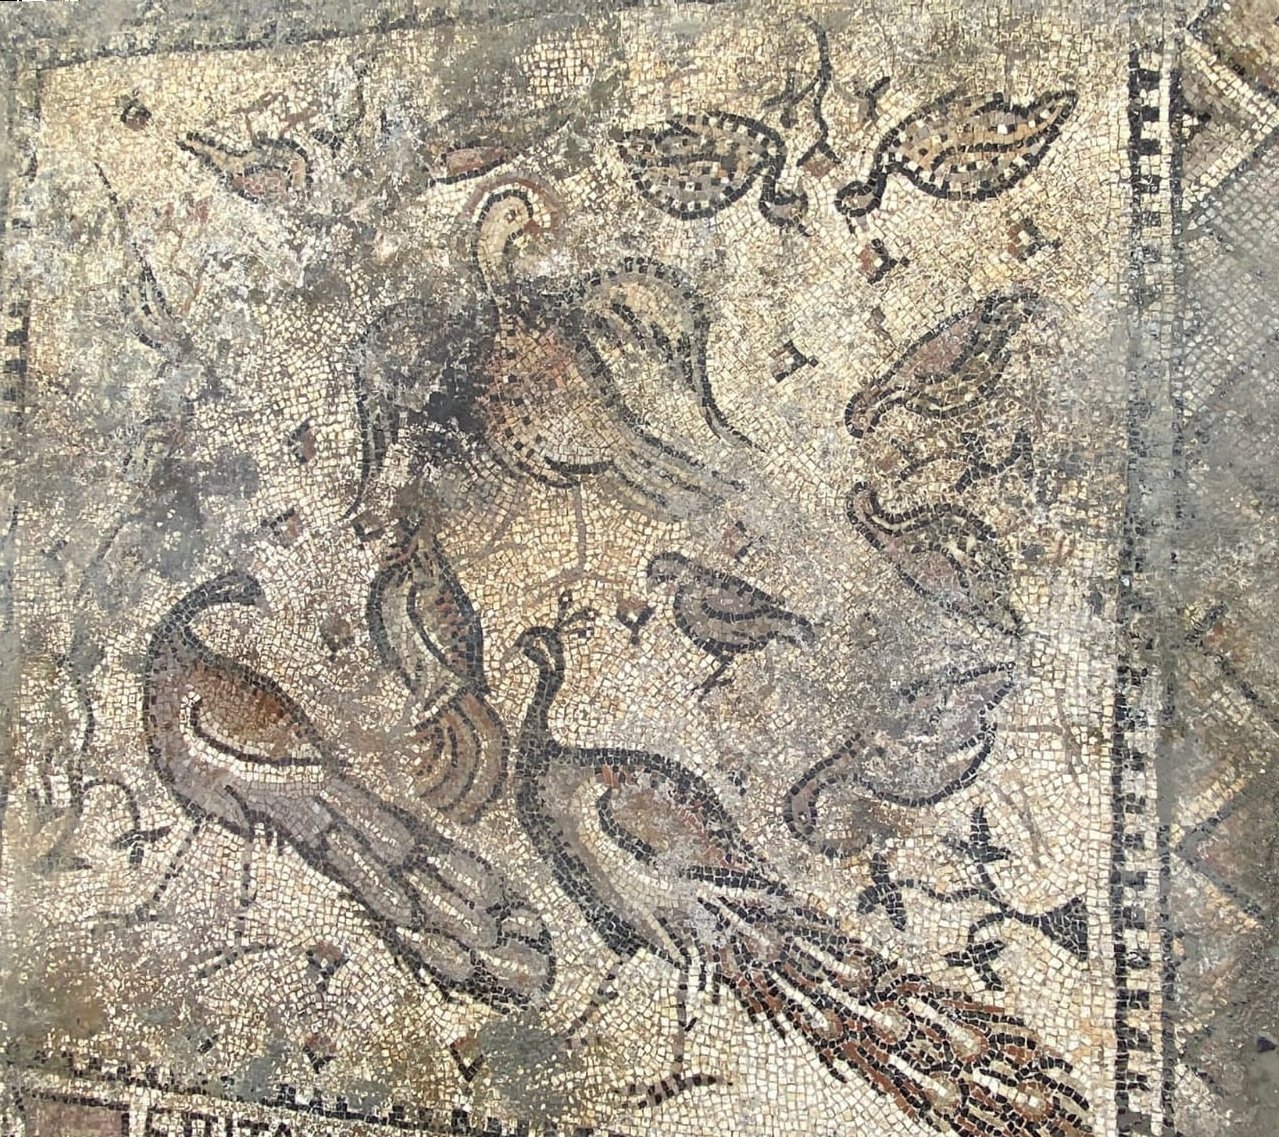 A close-up of peacocks depicted in the mosaic at the Church of the Holy Apostles, Hatay, southern Turkey, Jan. 10, 2022. (AA)